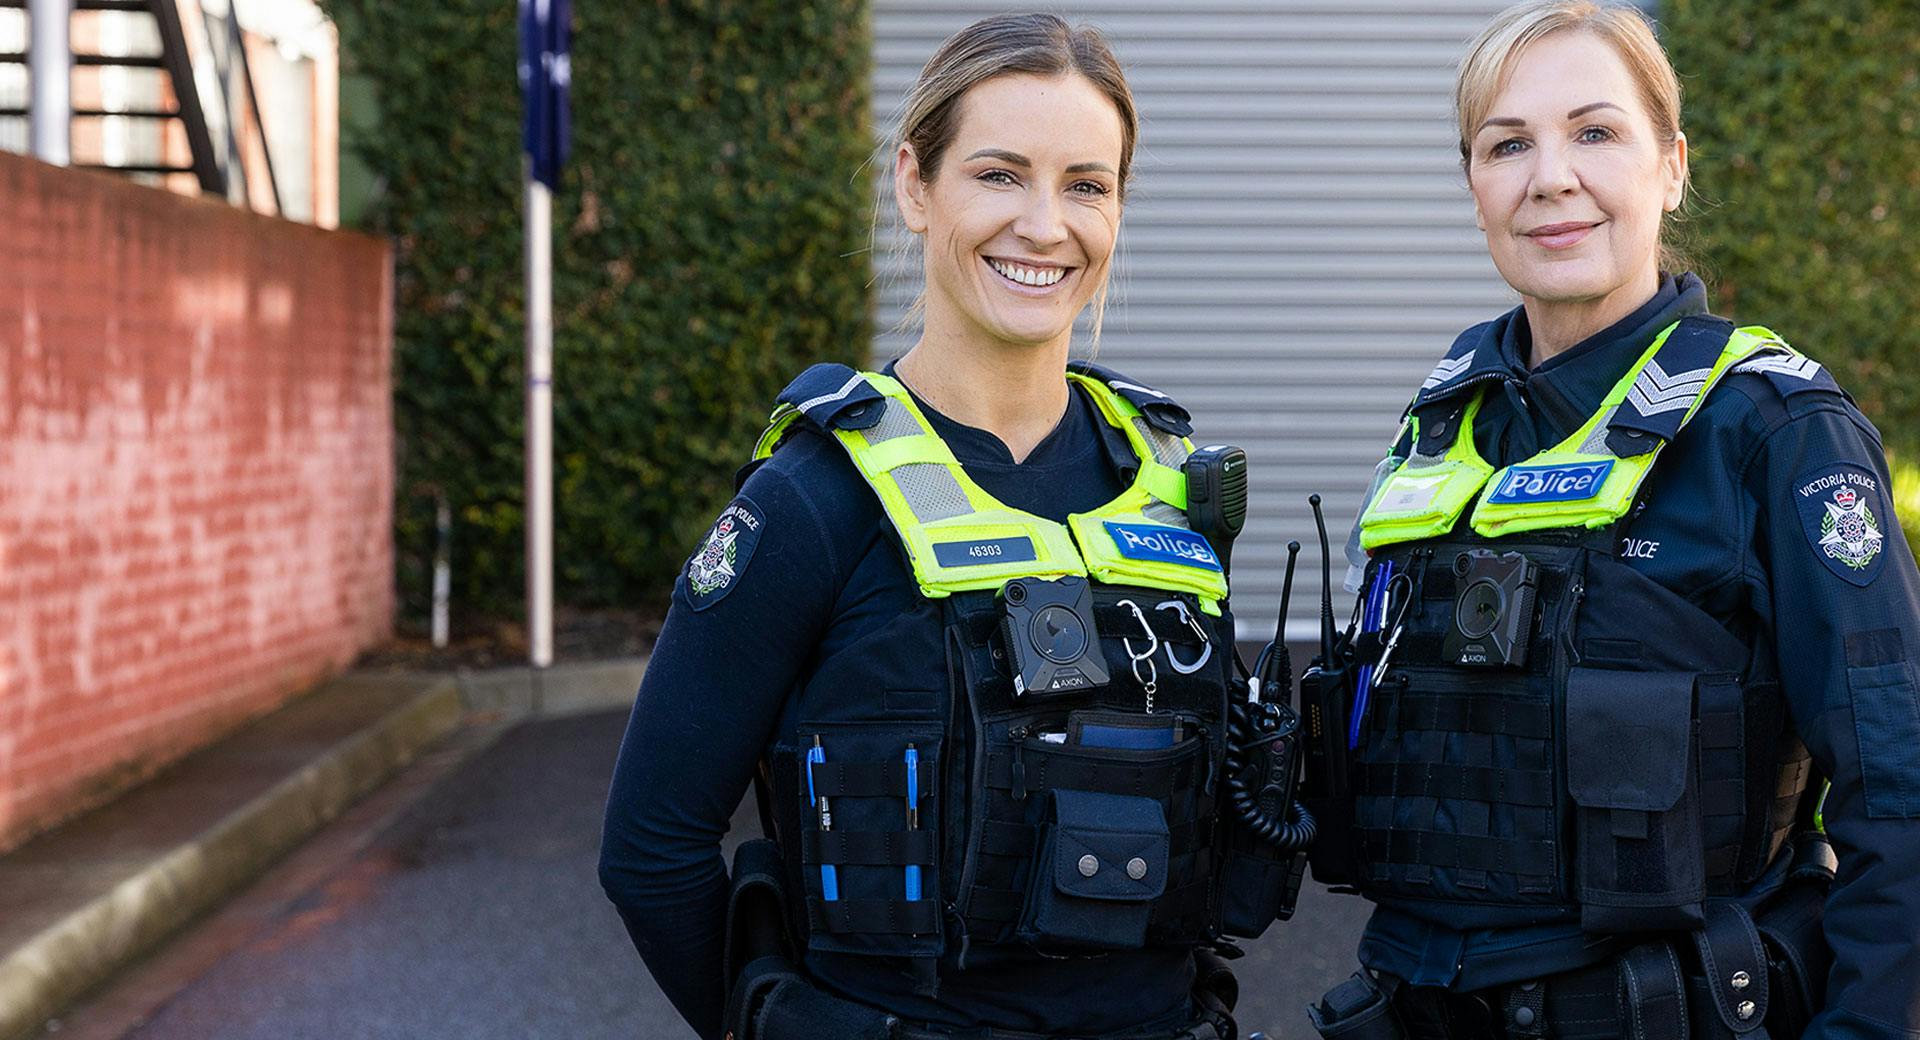 BankVic - bank for police and emergency workers